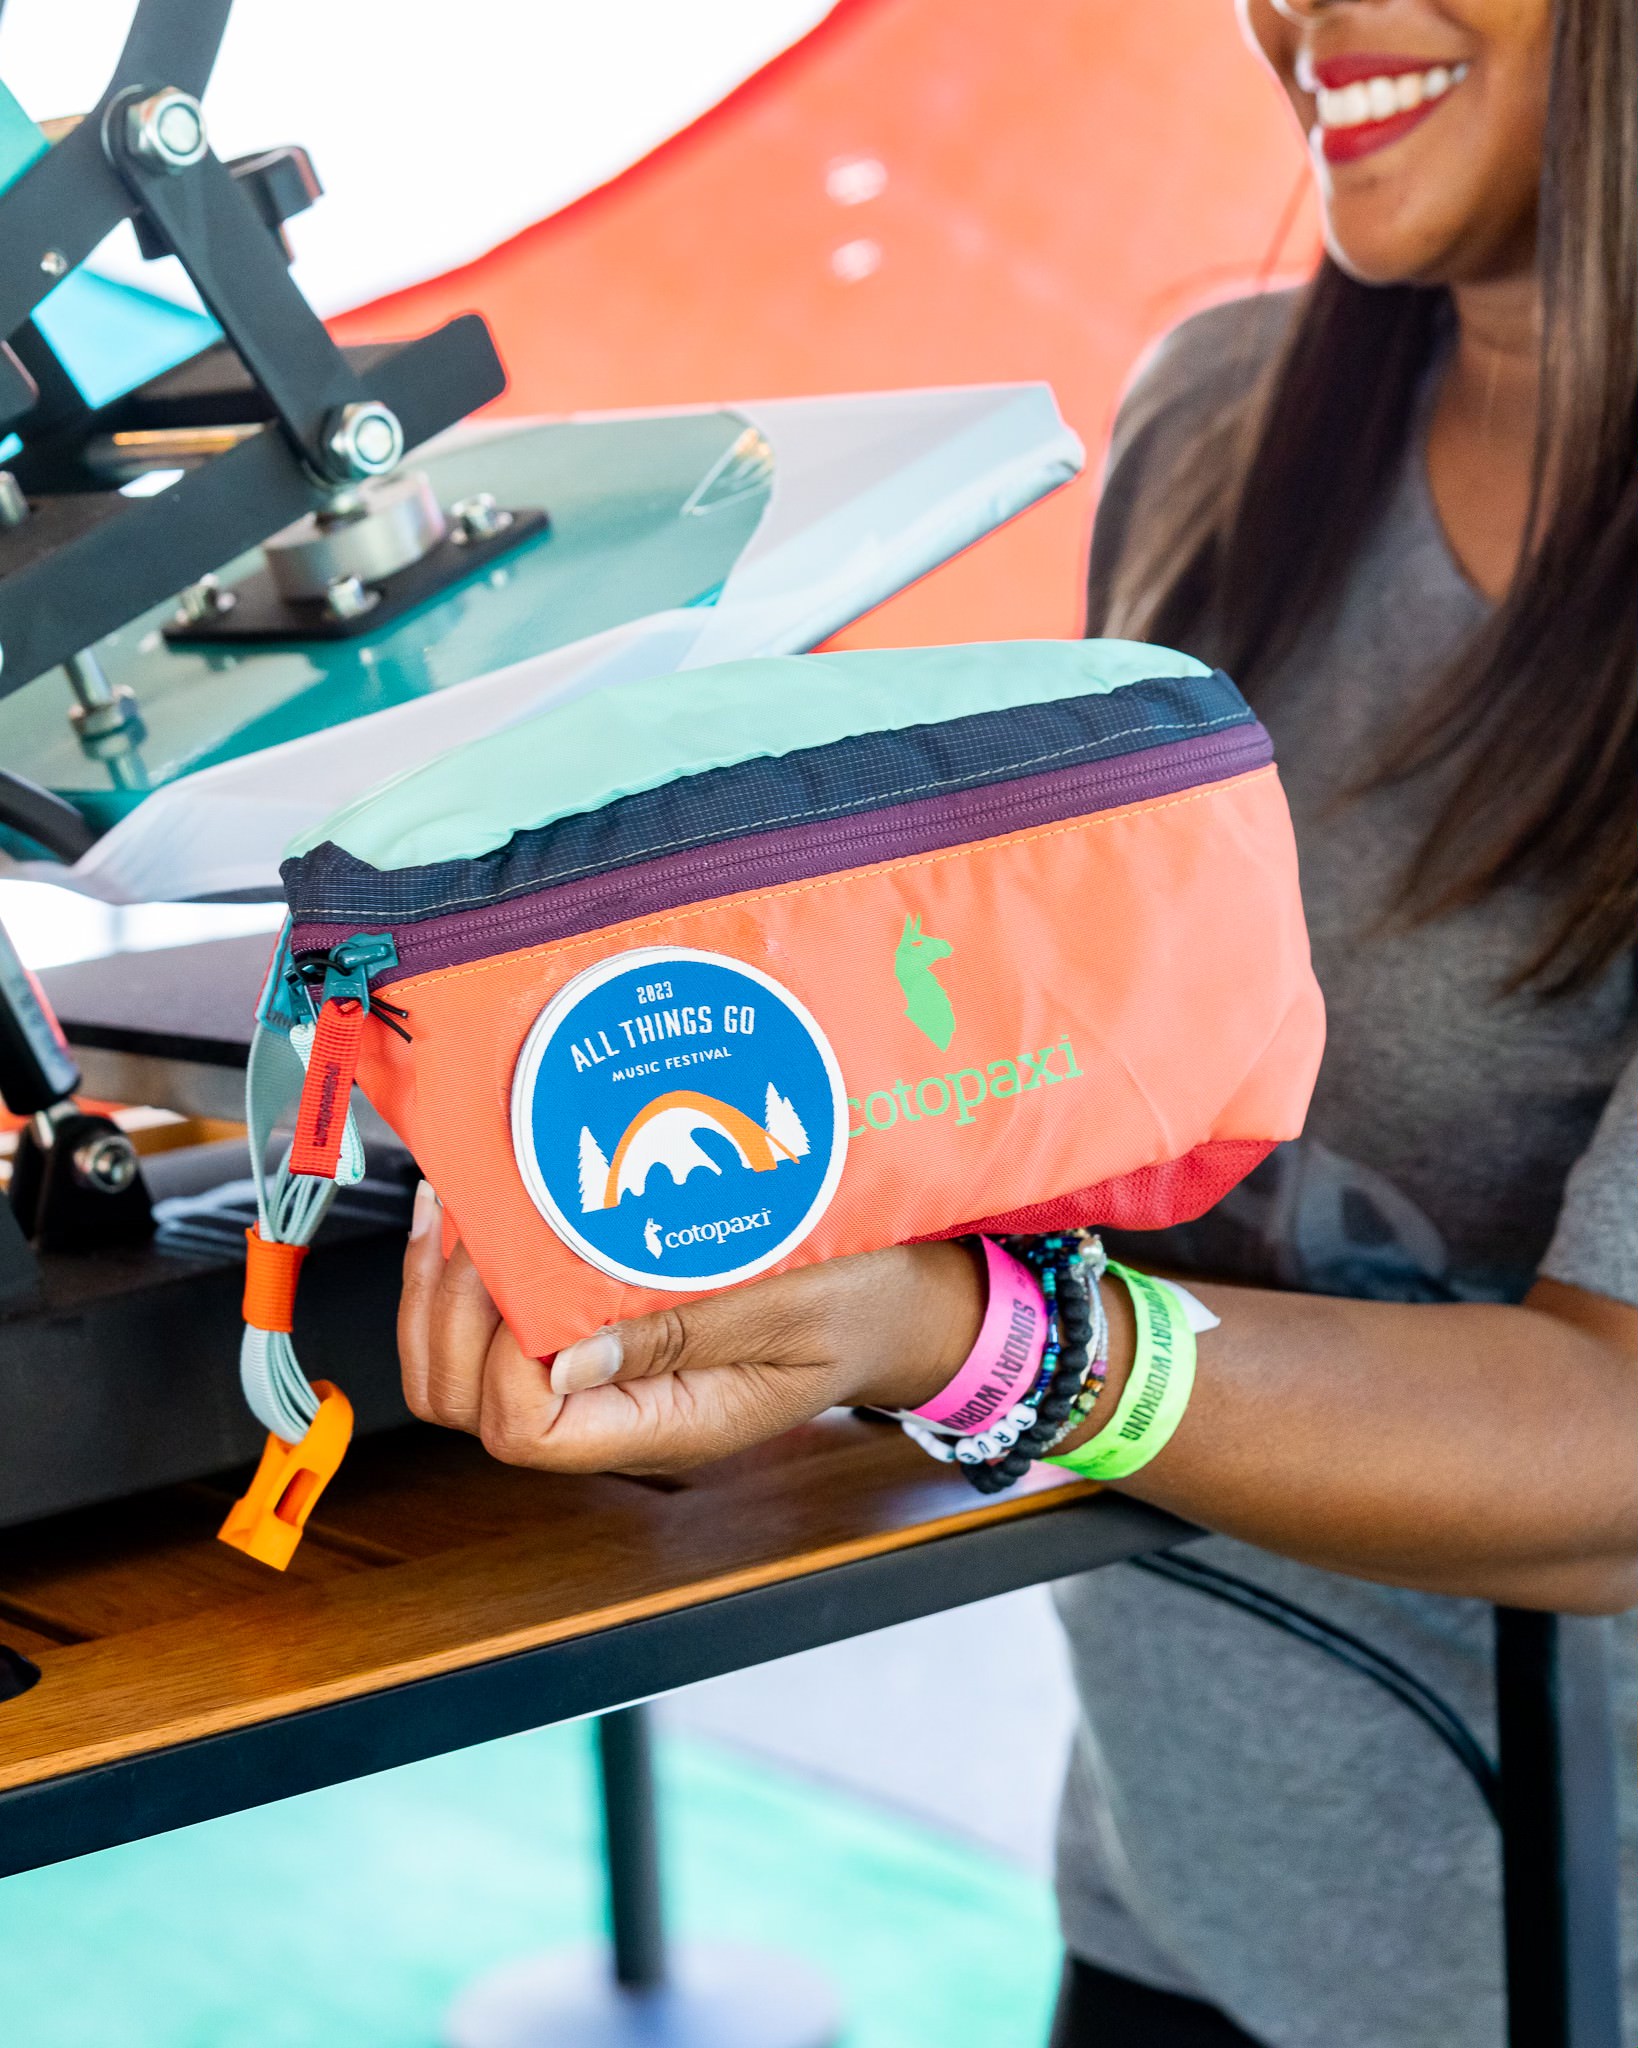 A customized Cotopaxi bag at All Things Go.